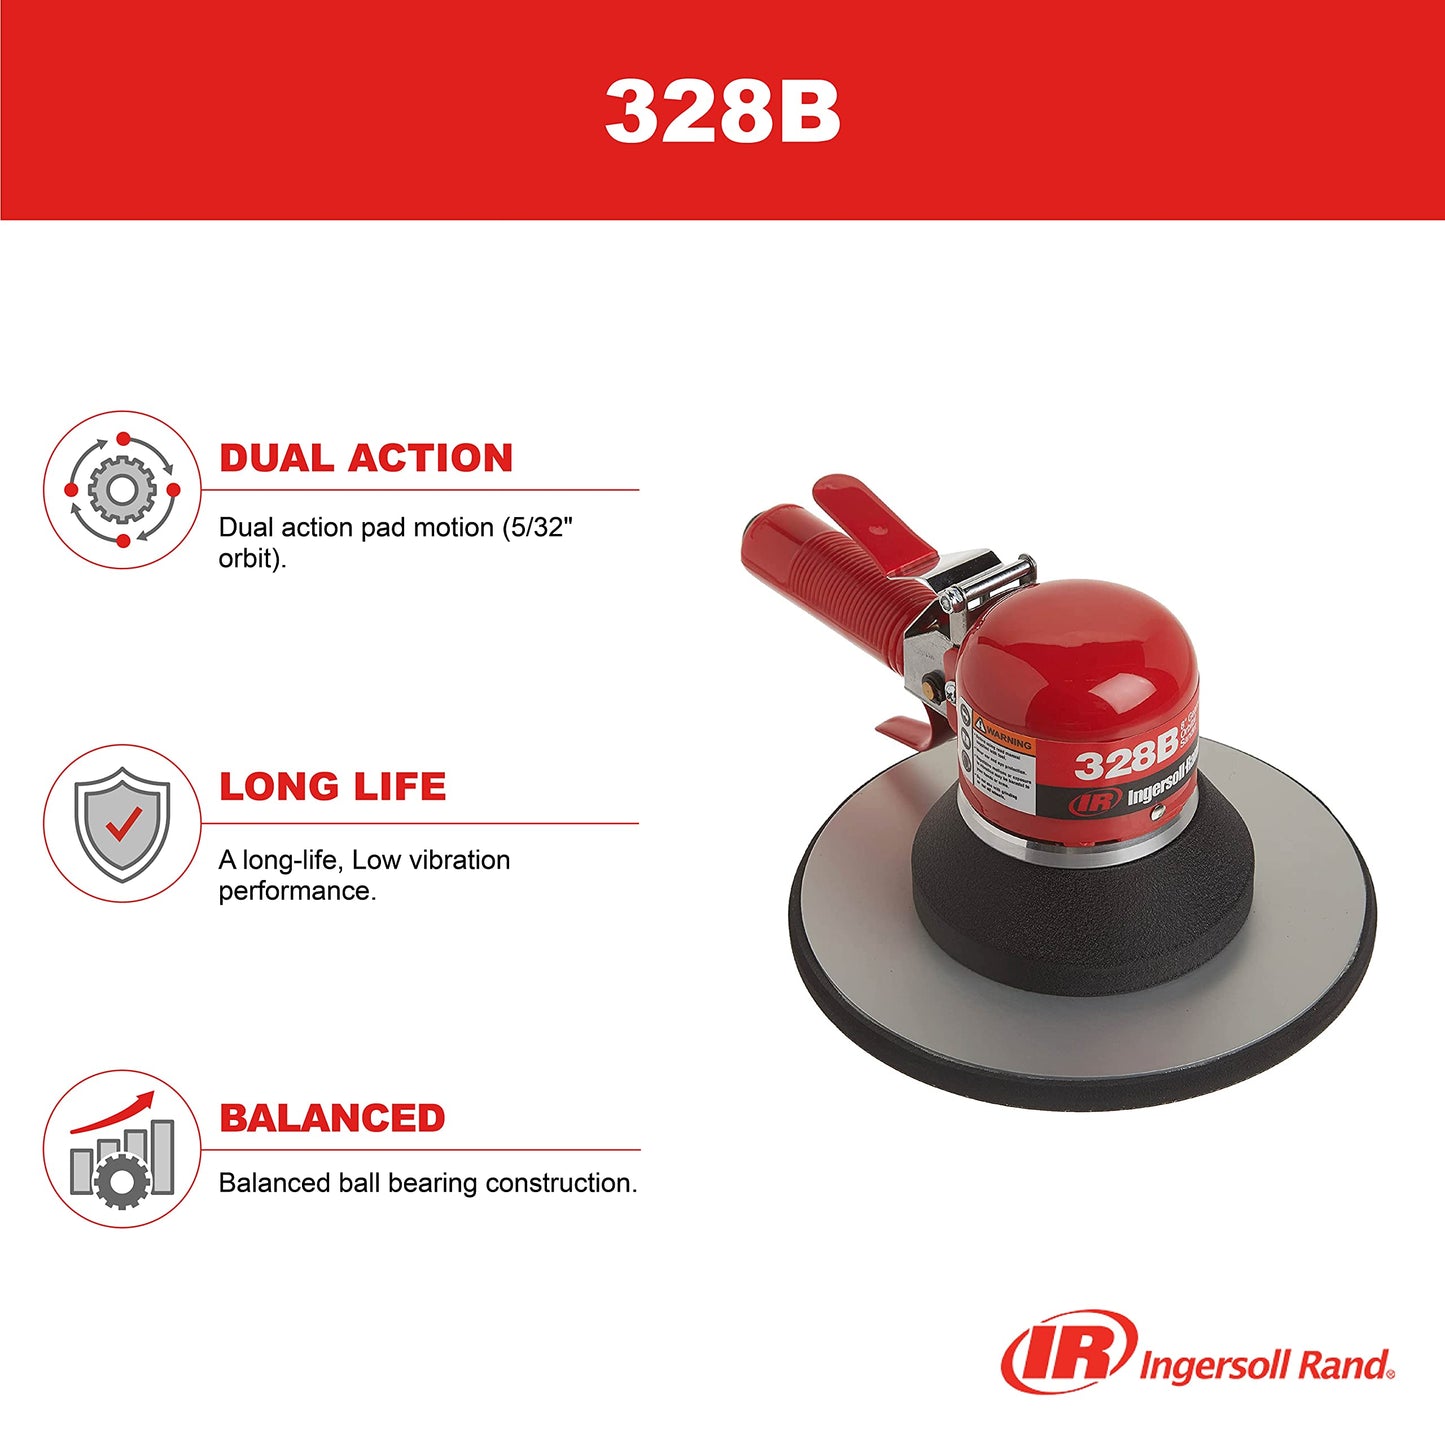 Ingersoll Rand 328B 8” Air Geared Orbital Sander, Heavy Duty, Dual Action Pad, Low Vibration, Swirl Free Finish, 825 Free Speed RPM, One Size,